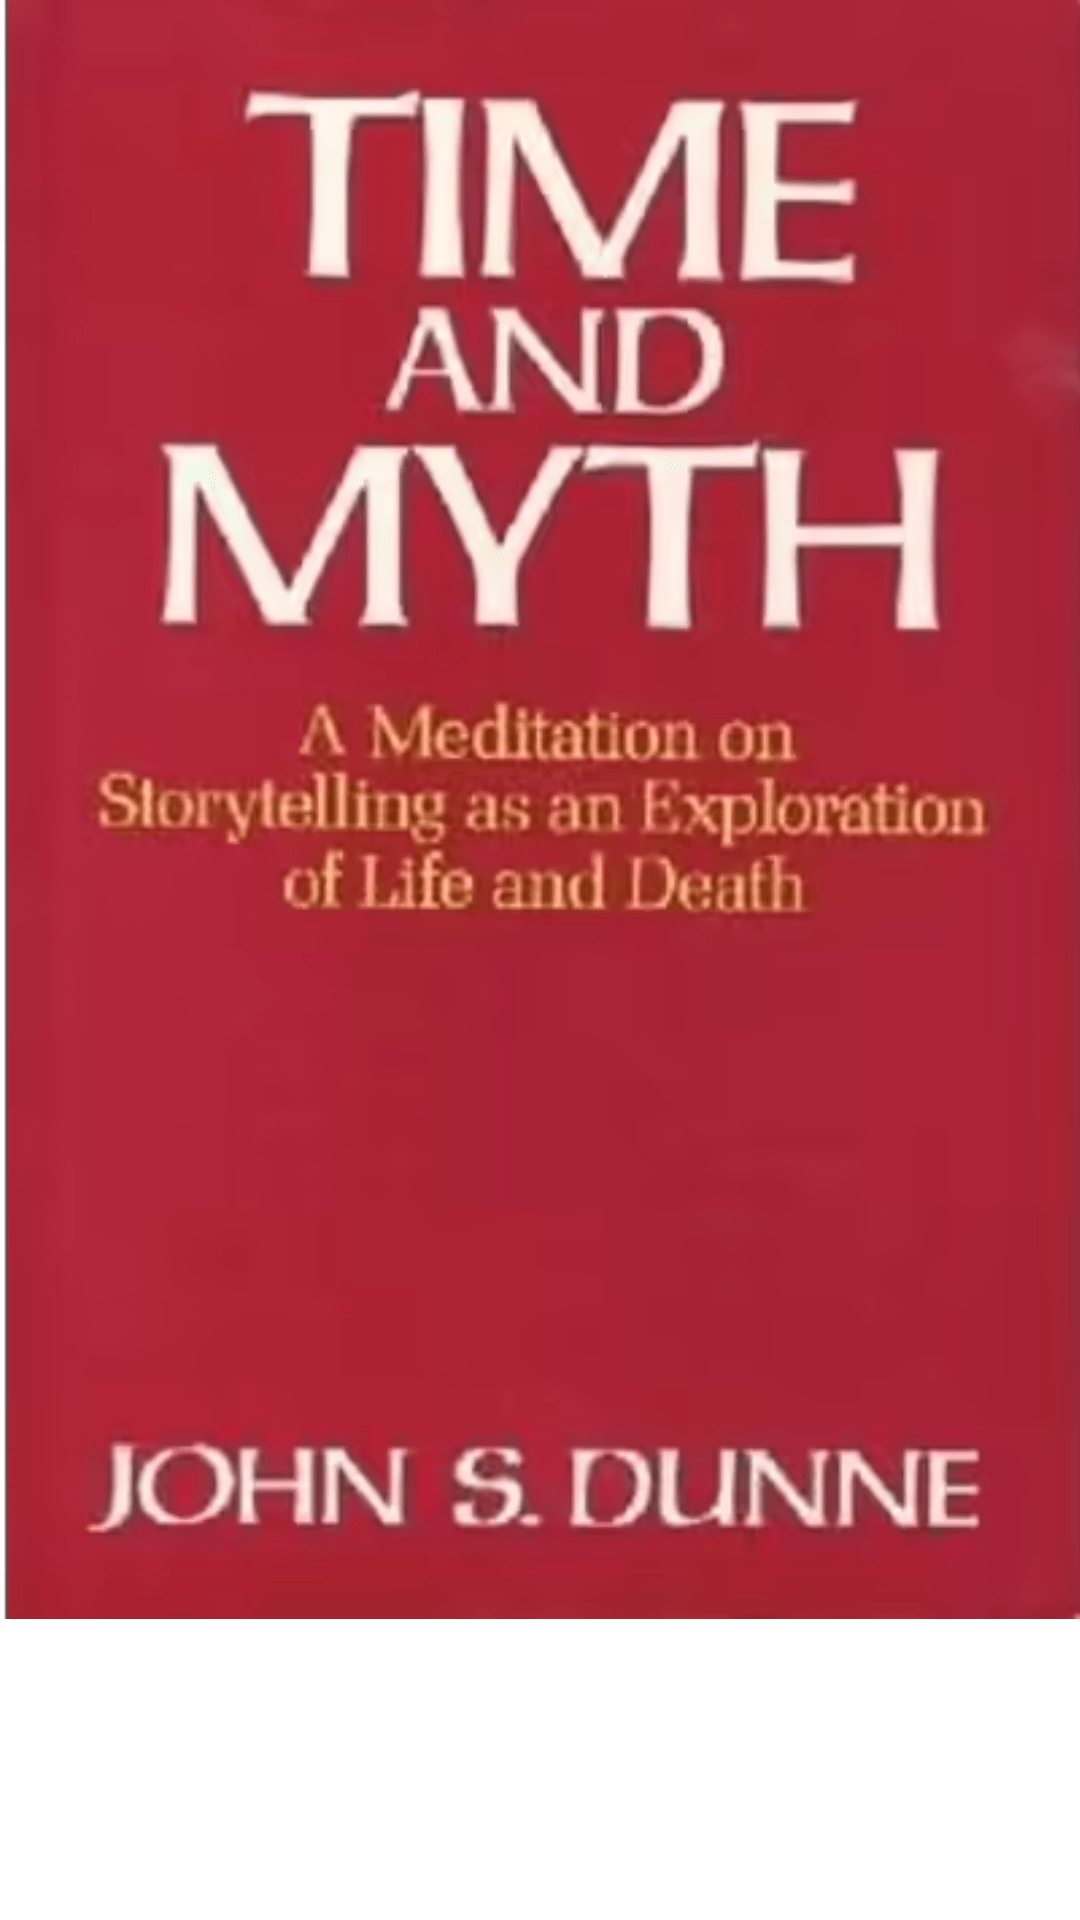 Time and Myth by John S. Dunne